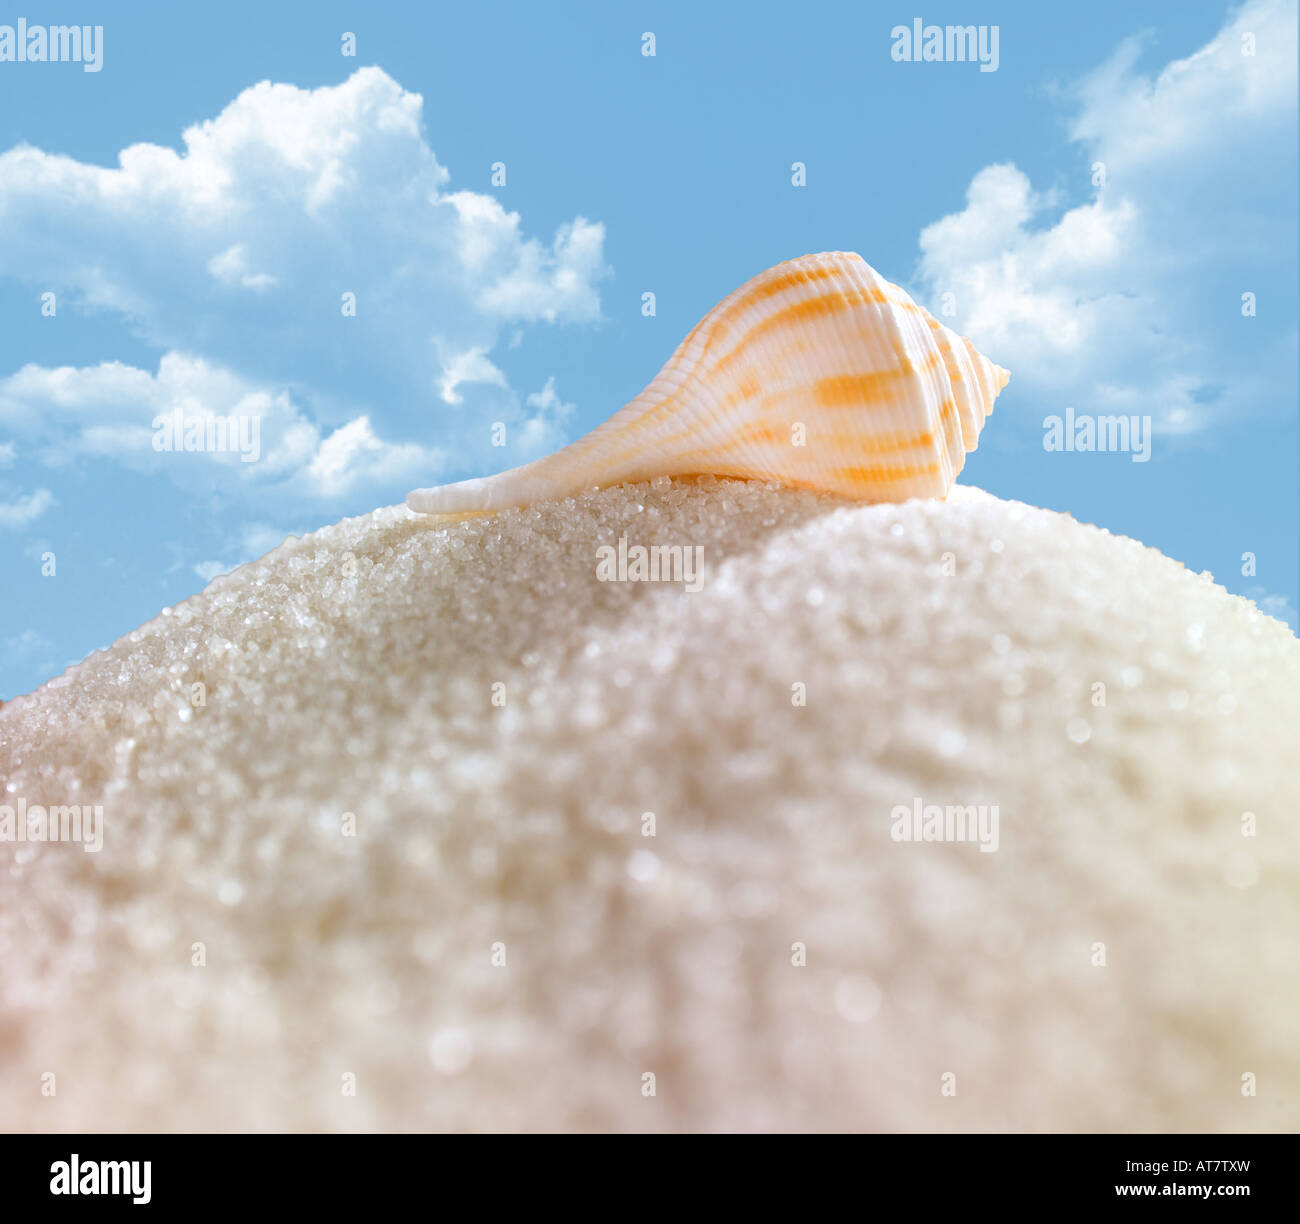 Snail Shell over a mount of white sand on a sunny day with few clouds. Stock Photo